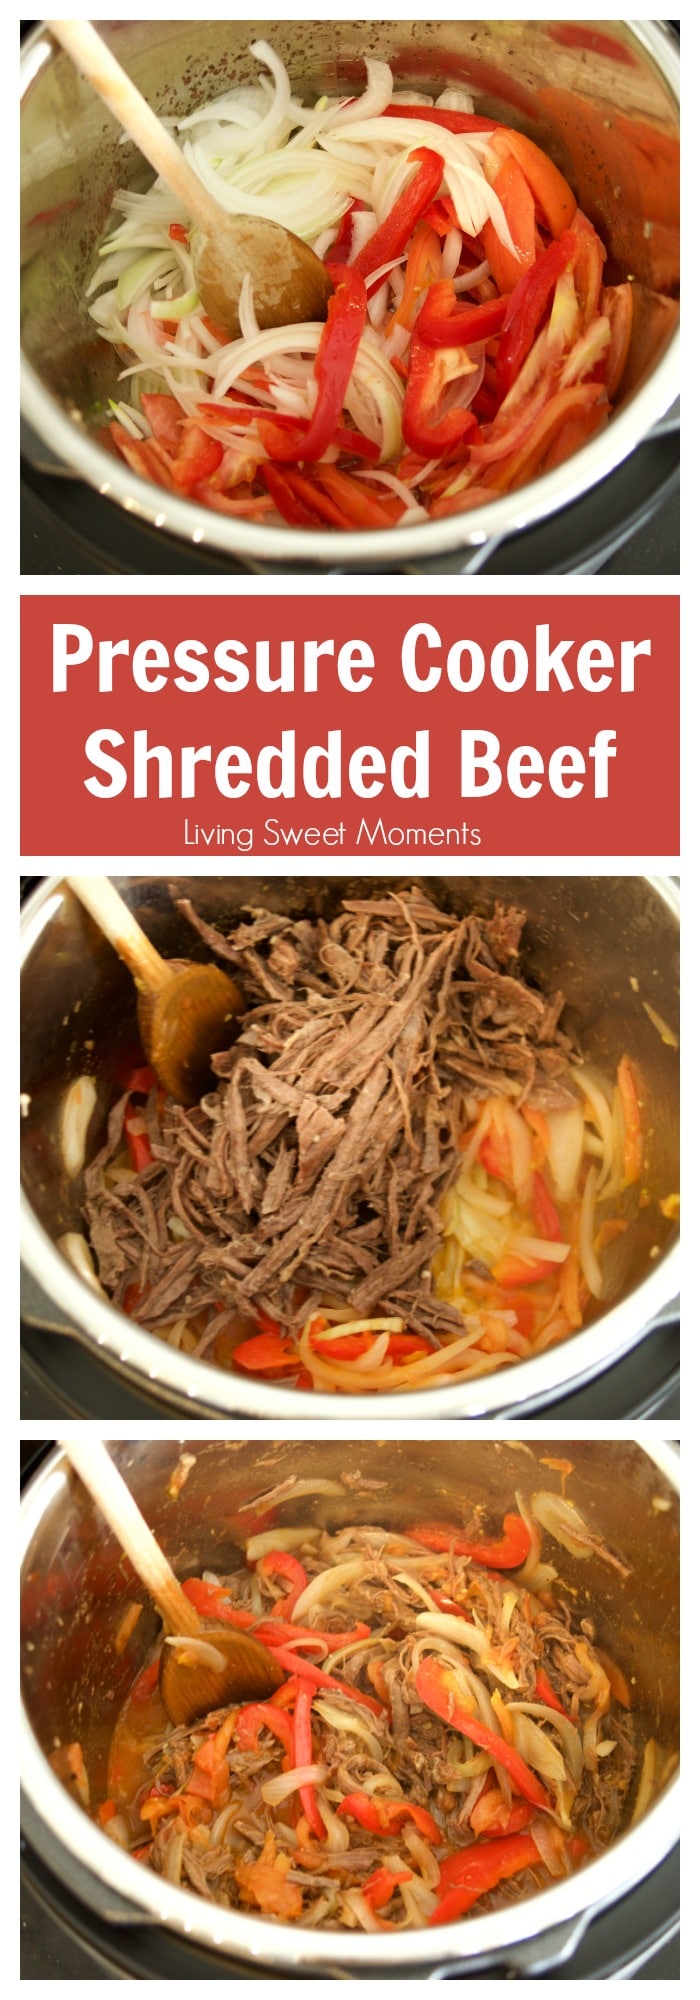 This Venezuelan Shredded Beef (carne mechada) is ready in no time using the Instant Pot pressure cooker. The perfect quick weeknight dinner idea! 